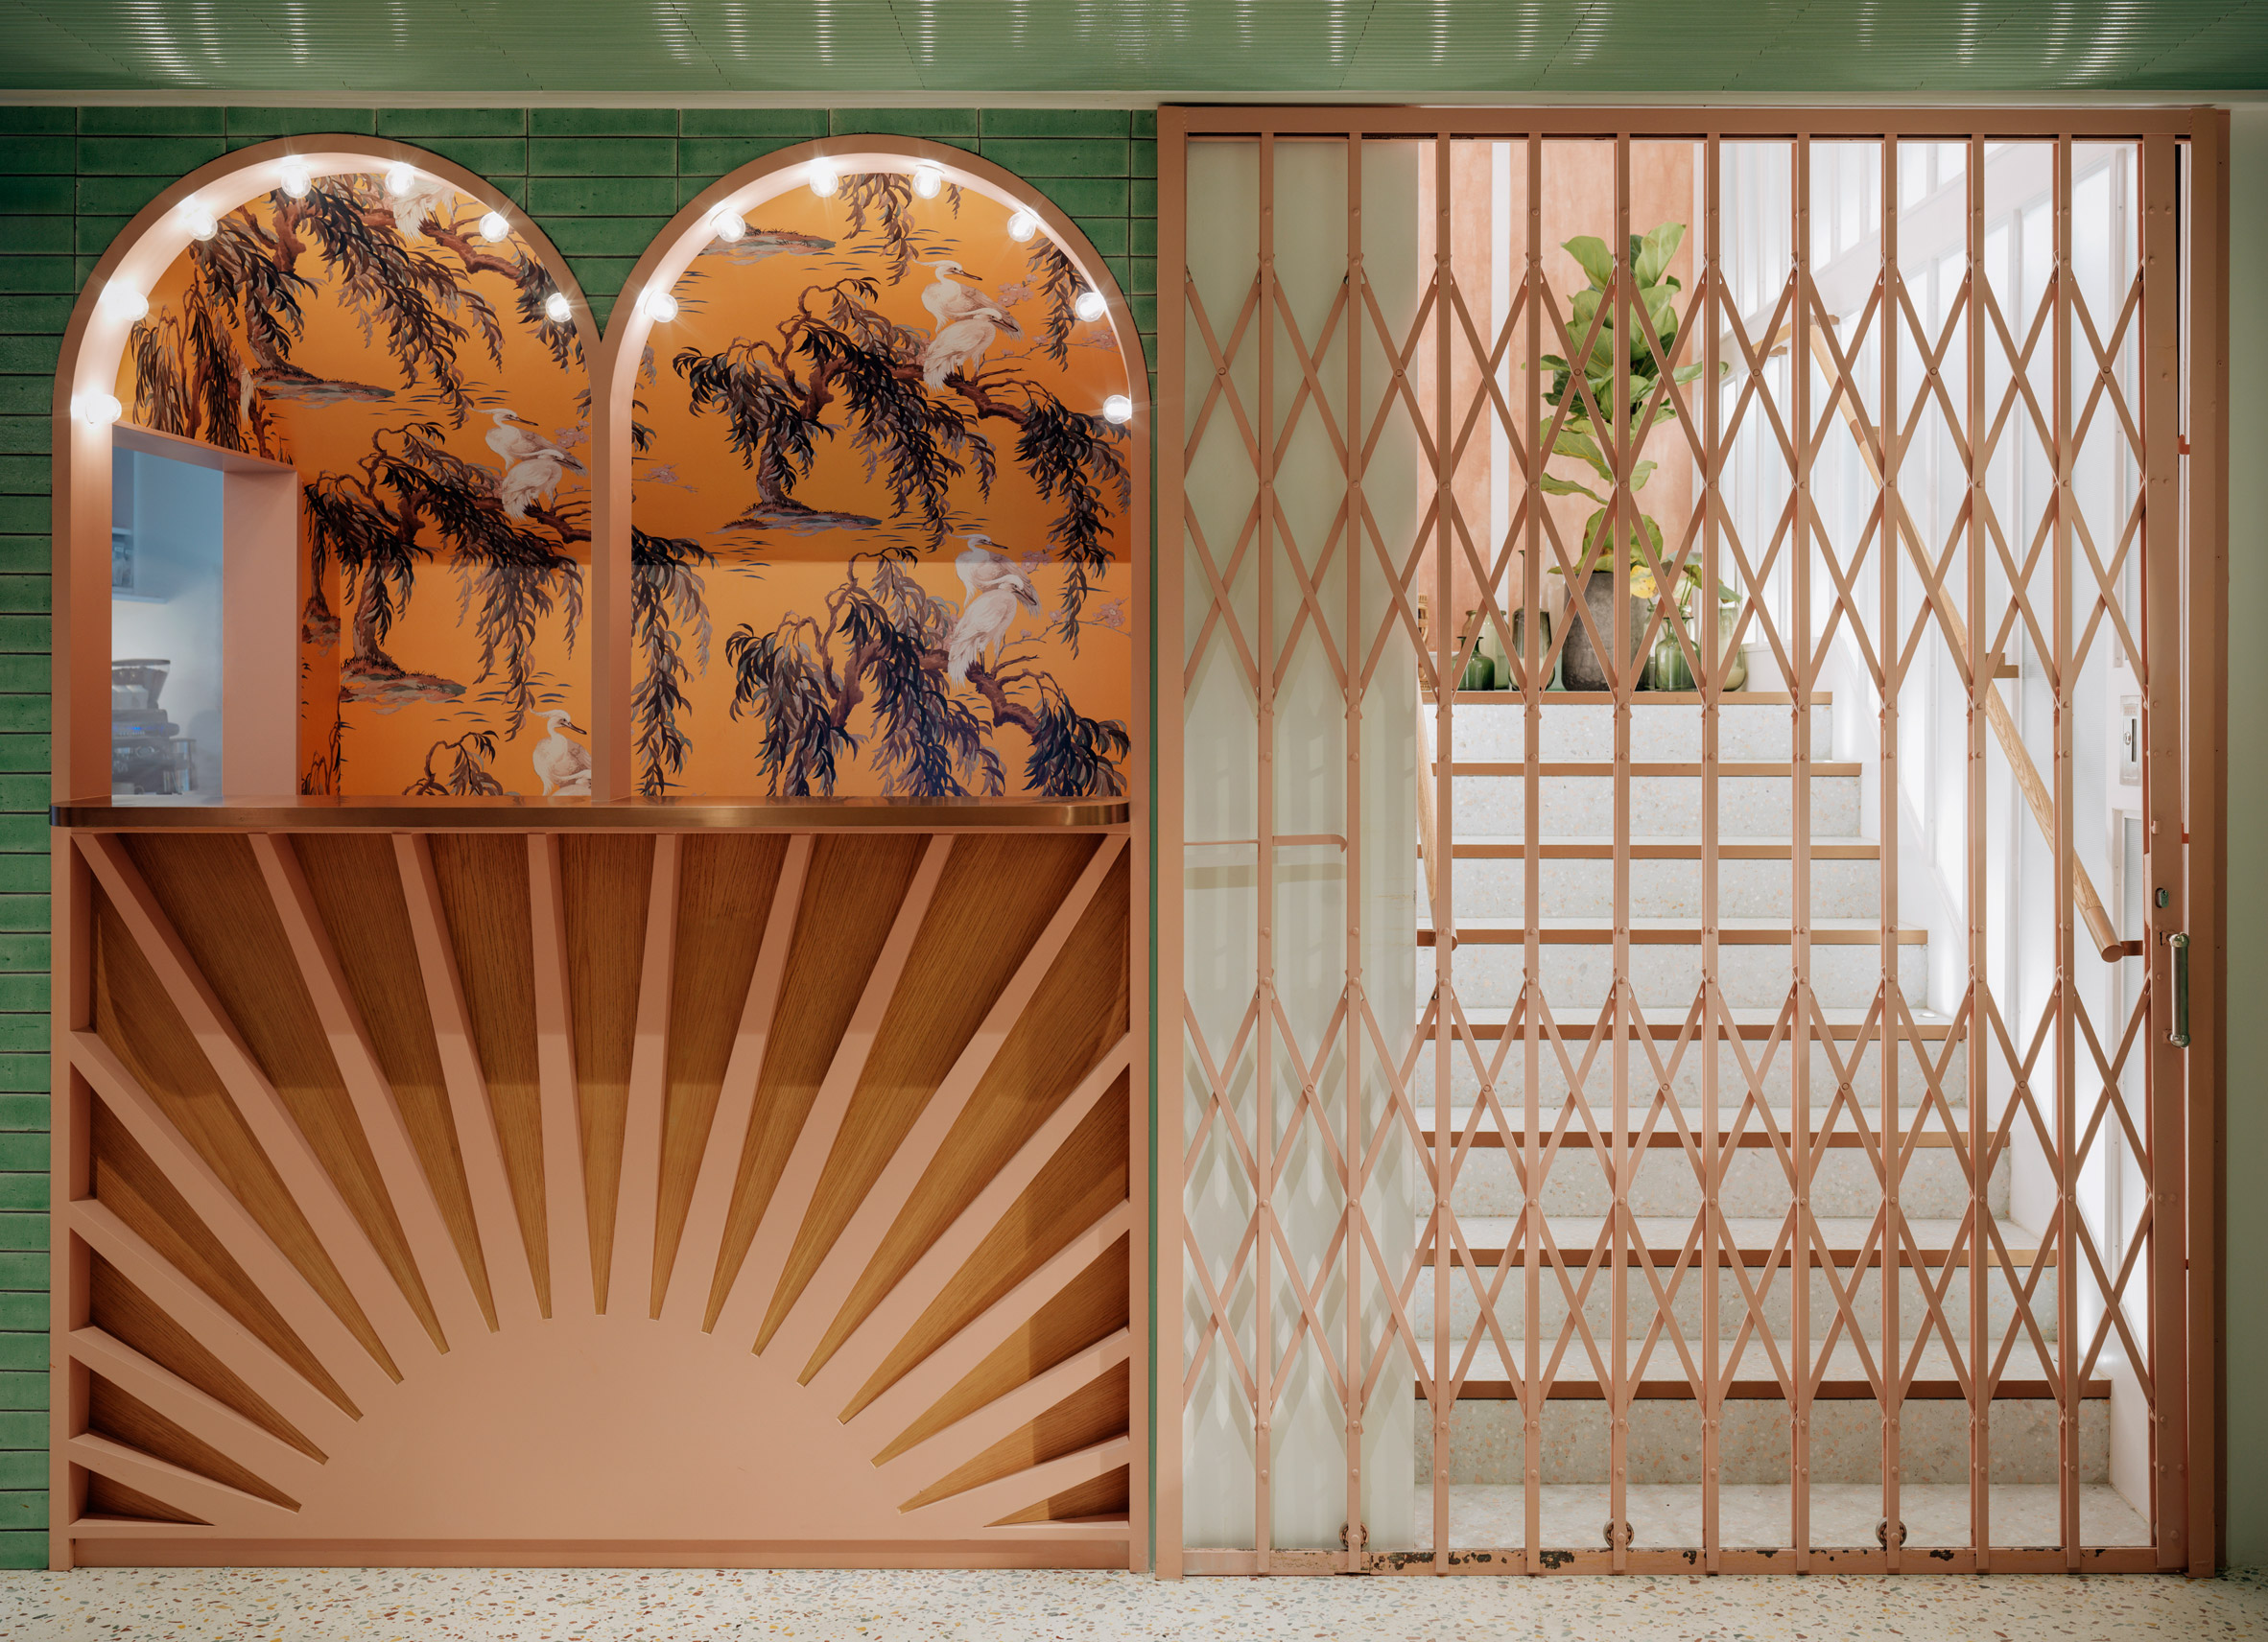 Dim sum restaurant by Linehouse Studio fuses east and west